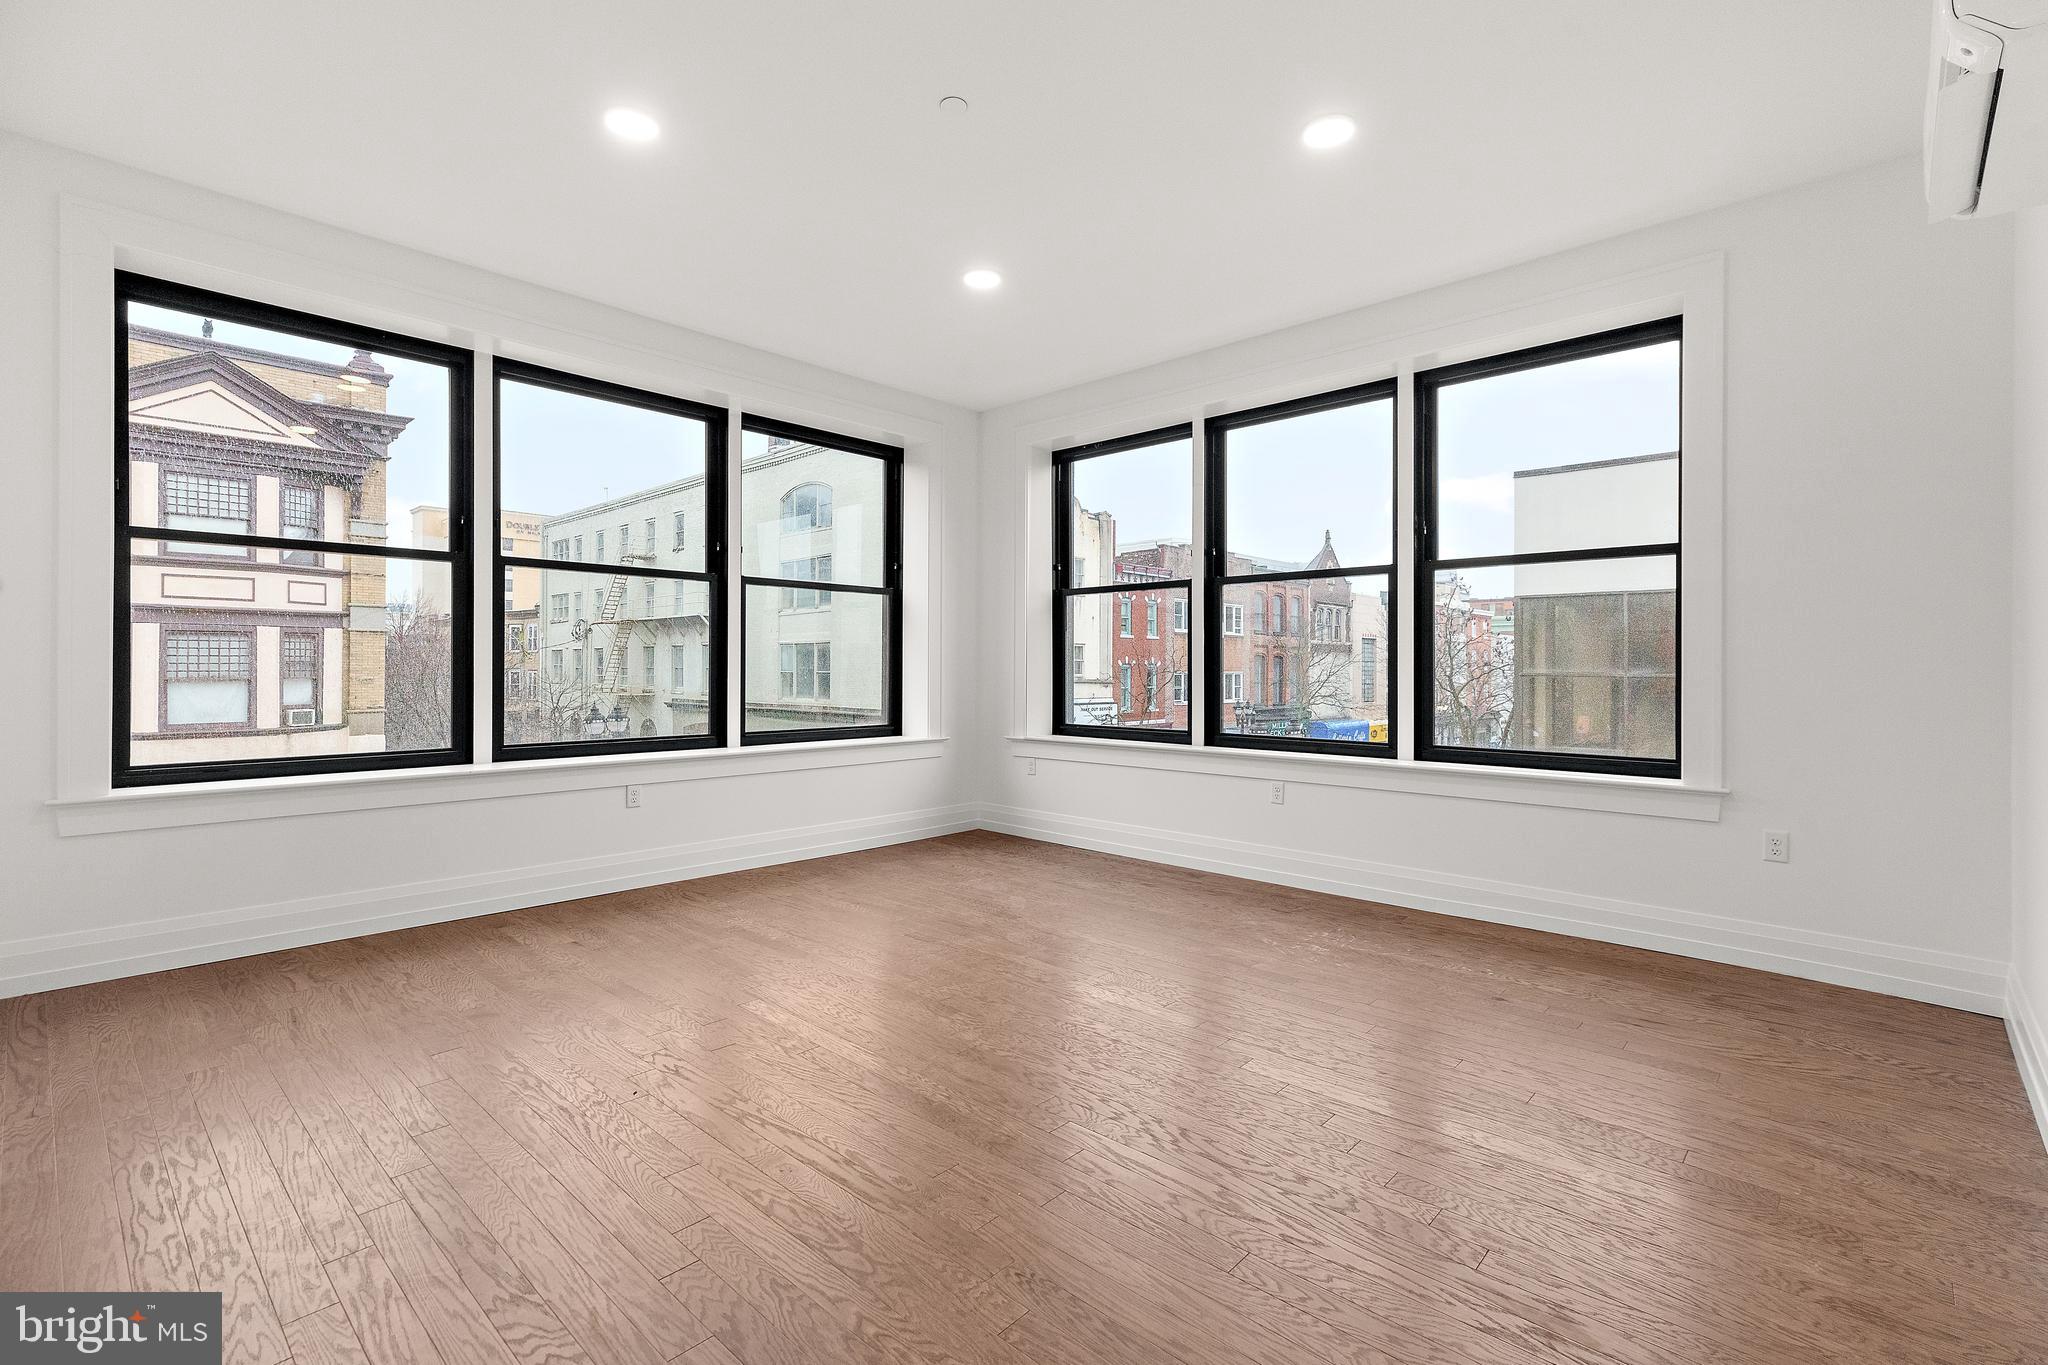 a view of an empty room with a window and hardwood floor